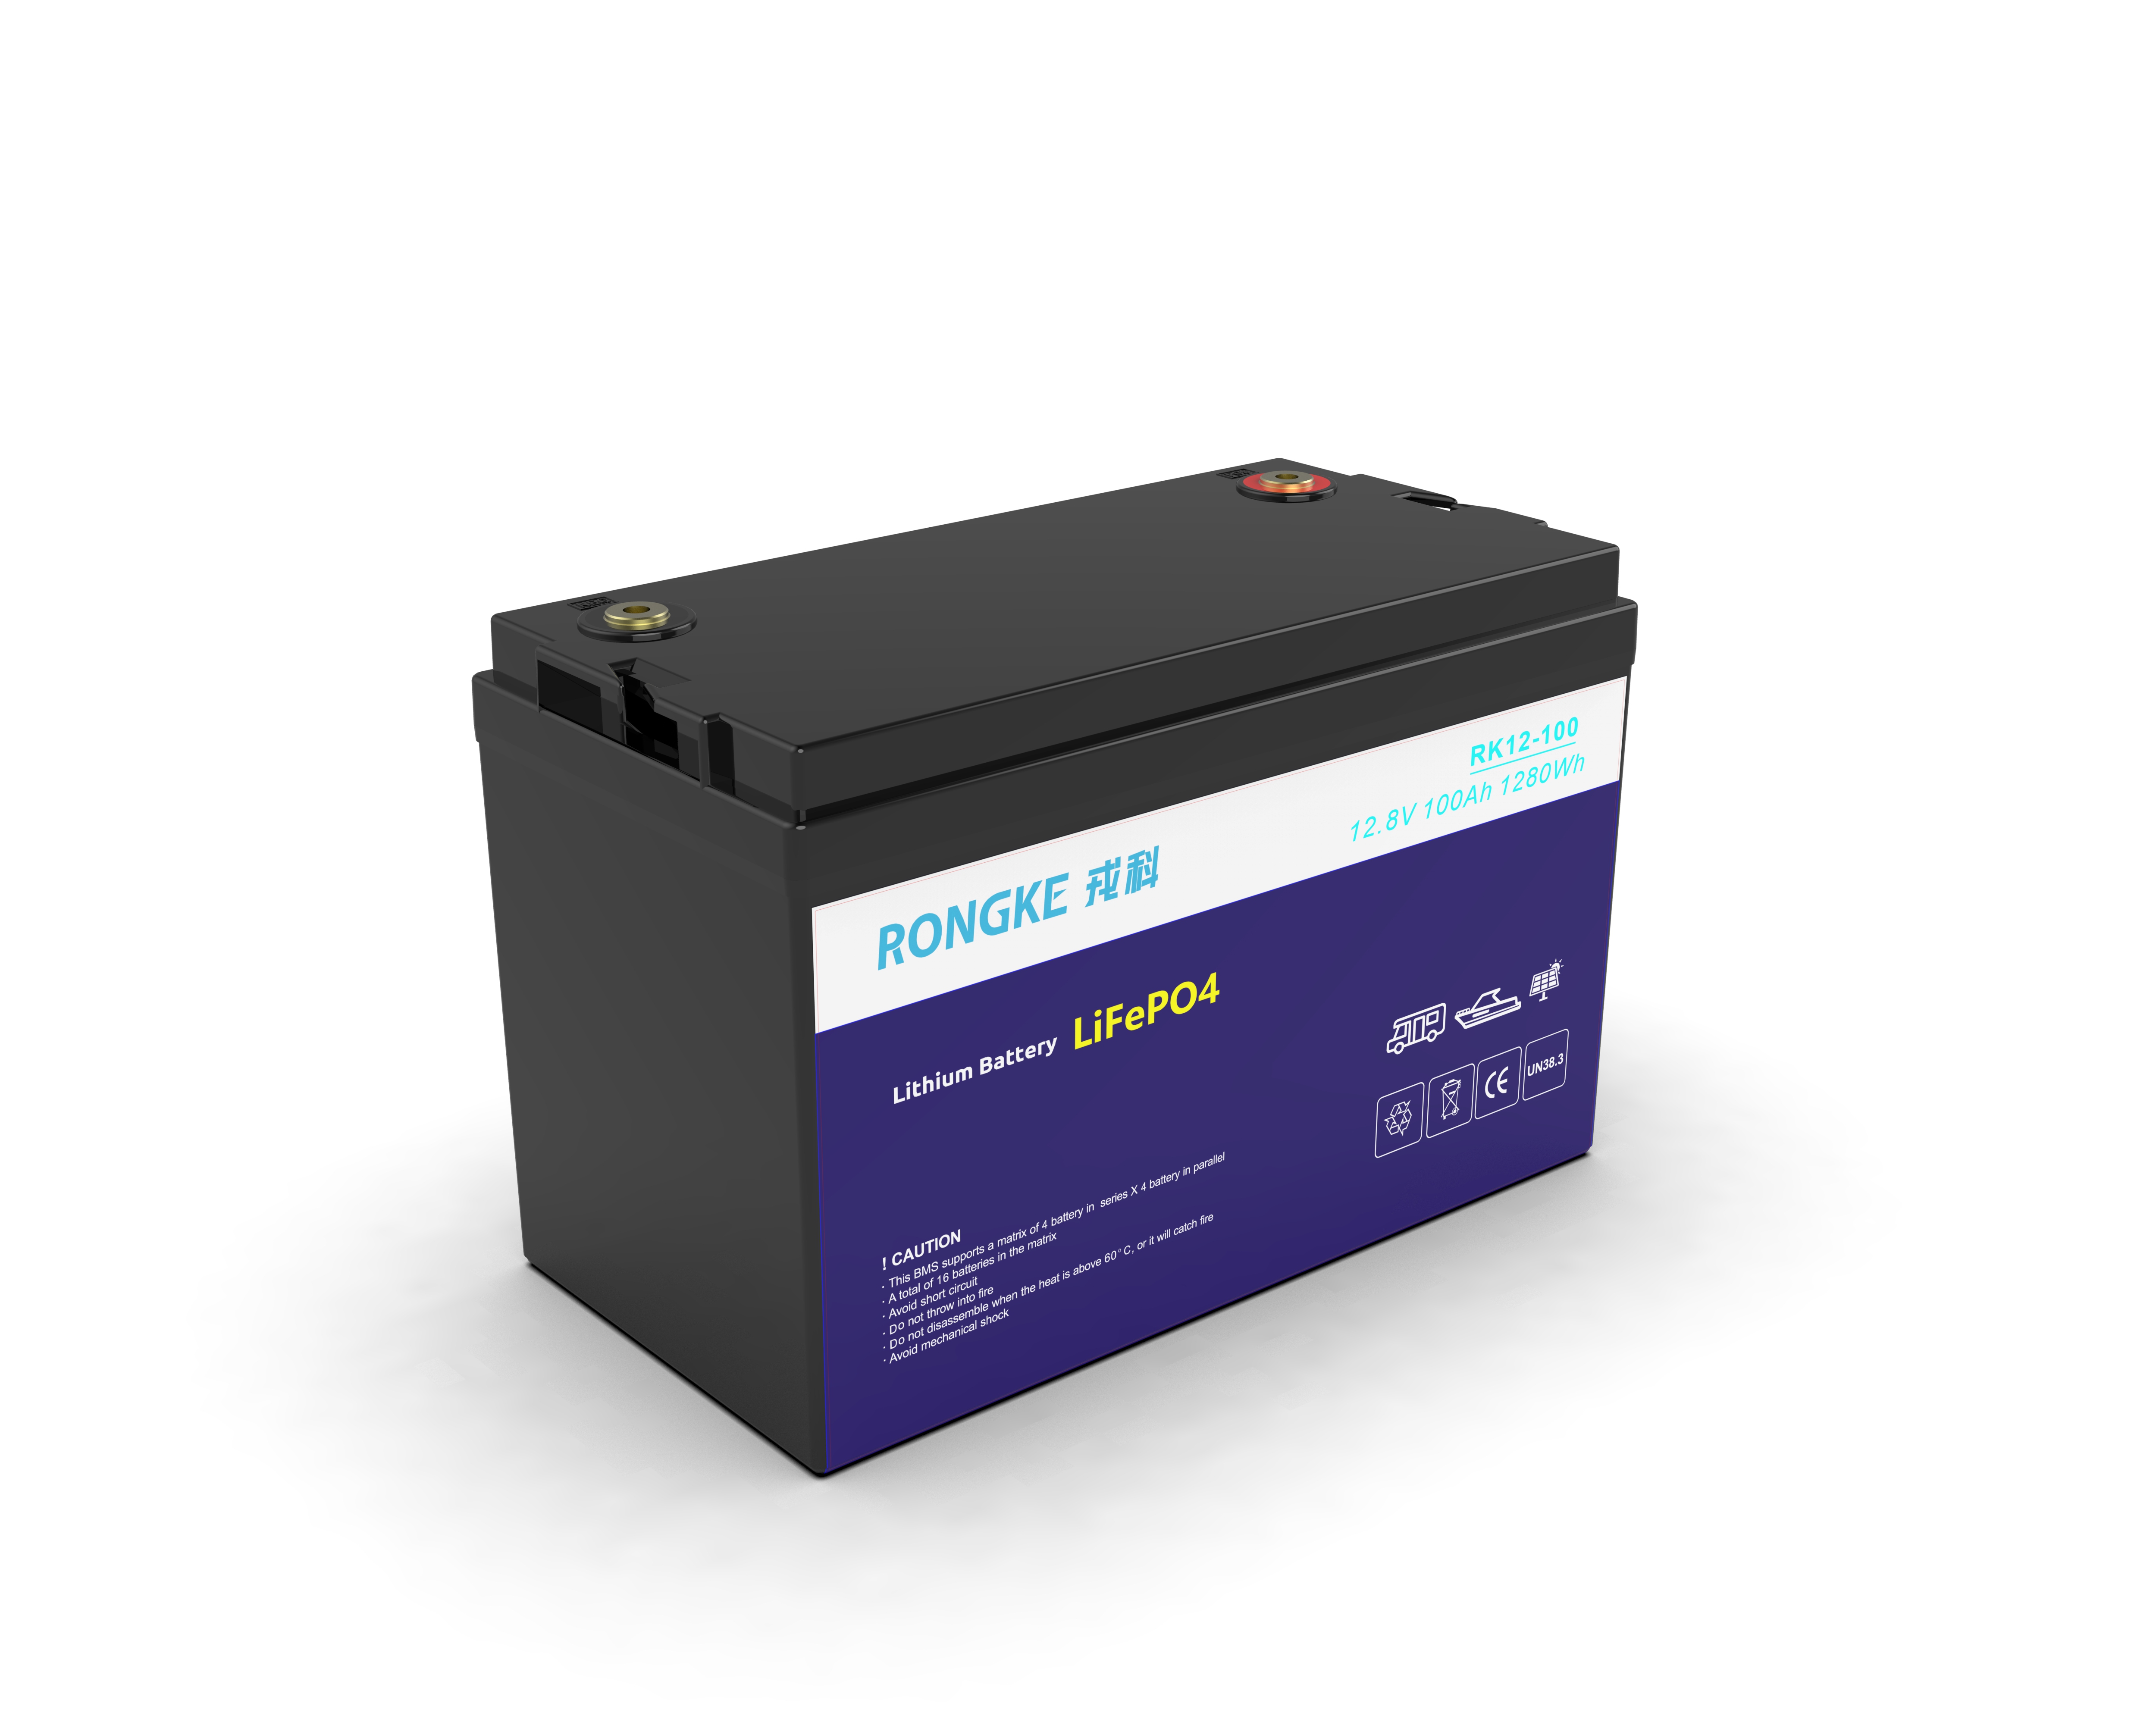  12V 100AH RV Batteries With Lithium lron Phosphate Technology Perfect to Replace Lead-Acid Battery  